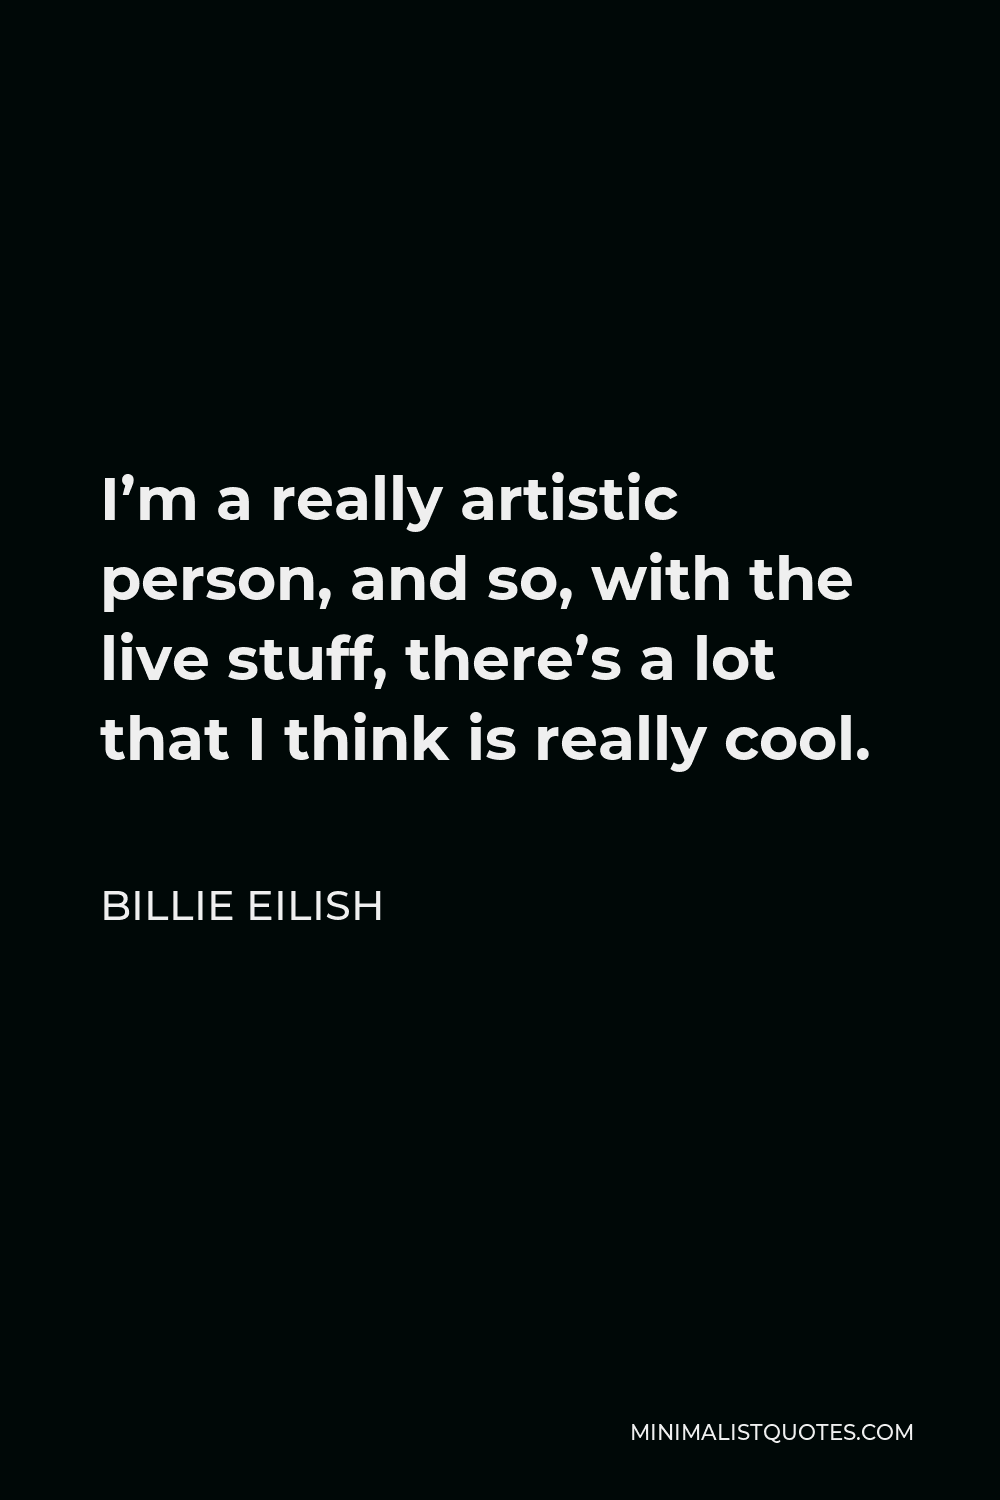 Billie Eilish Quote - I’m a really artistic person, and so, with the live stuff, there’s a lot that I think is really cool.